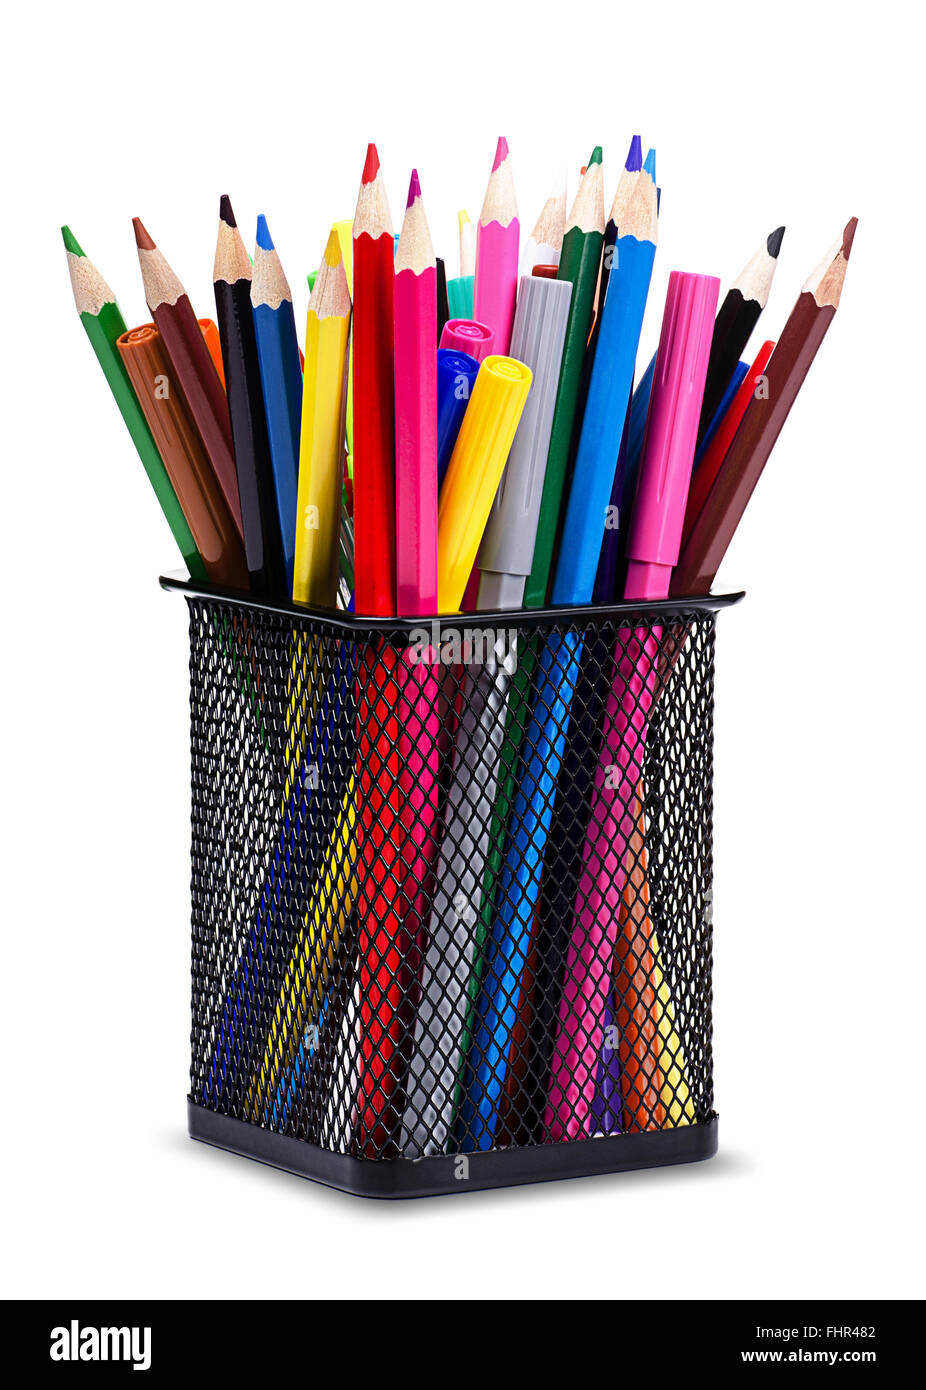 https://c8.alamy.com/comp/FHR482/close-up-color-pencils-and-markers-in-metal-glass-on-white-background-FHR482.jpg